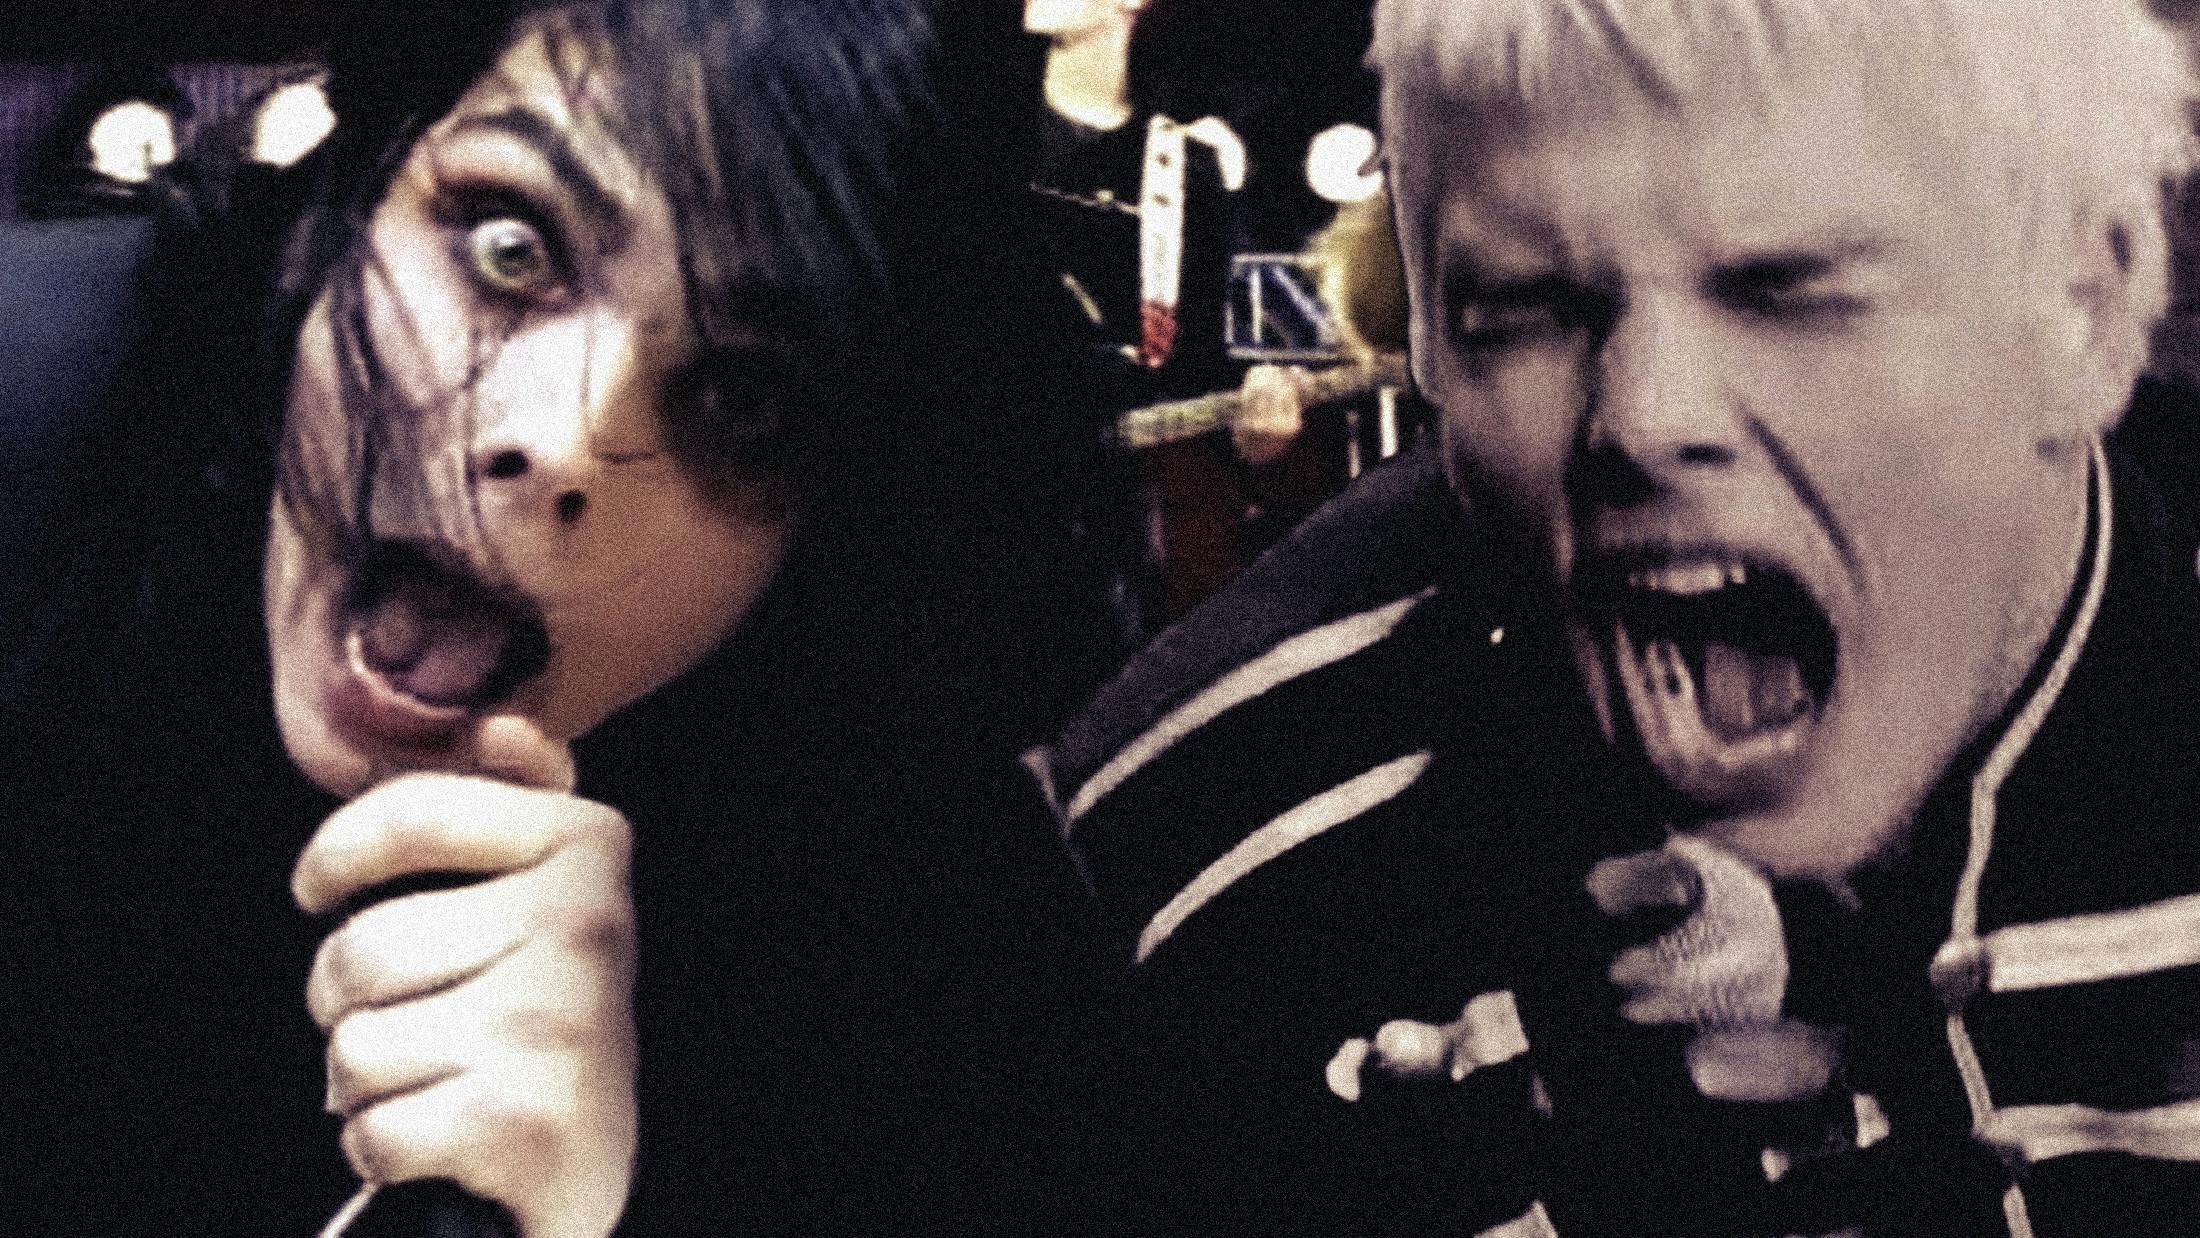 Three Cheers Vs. The Black Parade – Which Is The Best My Chemical Romance Album?